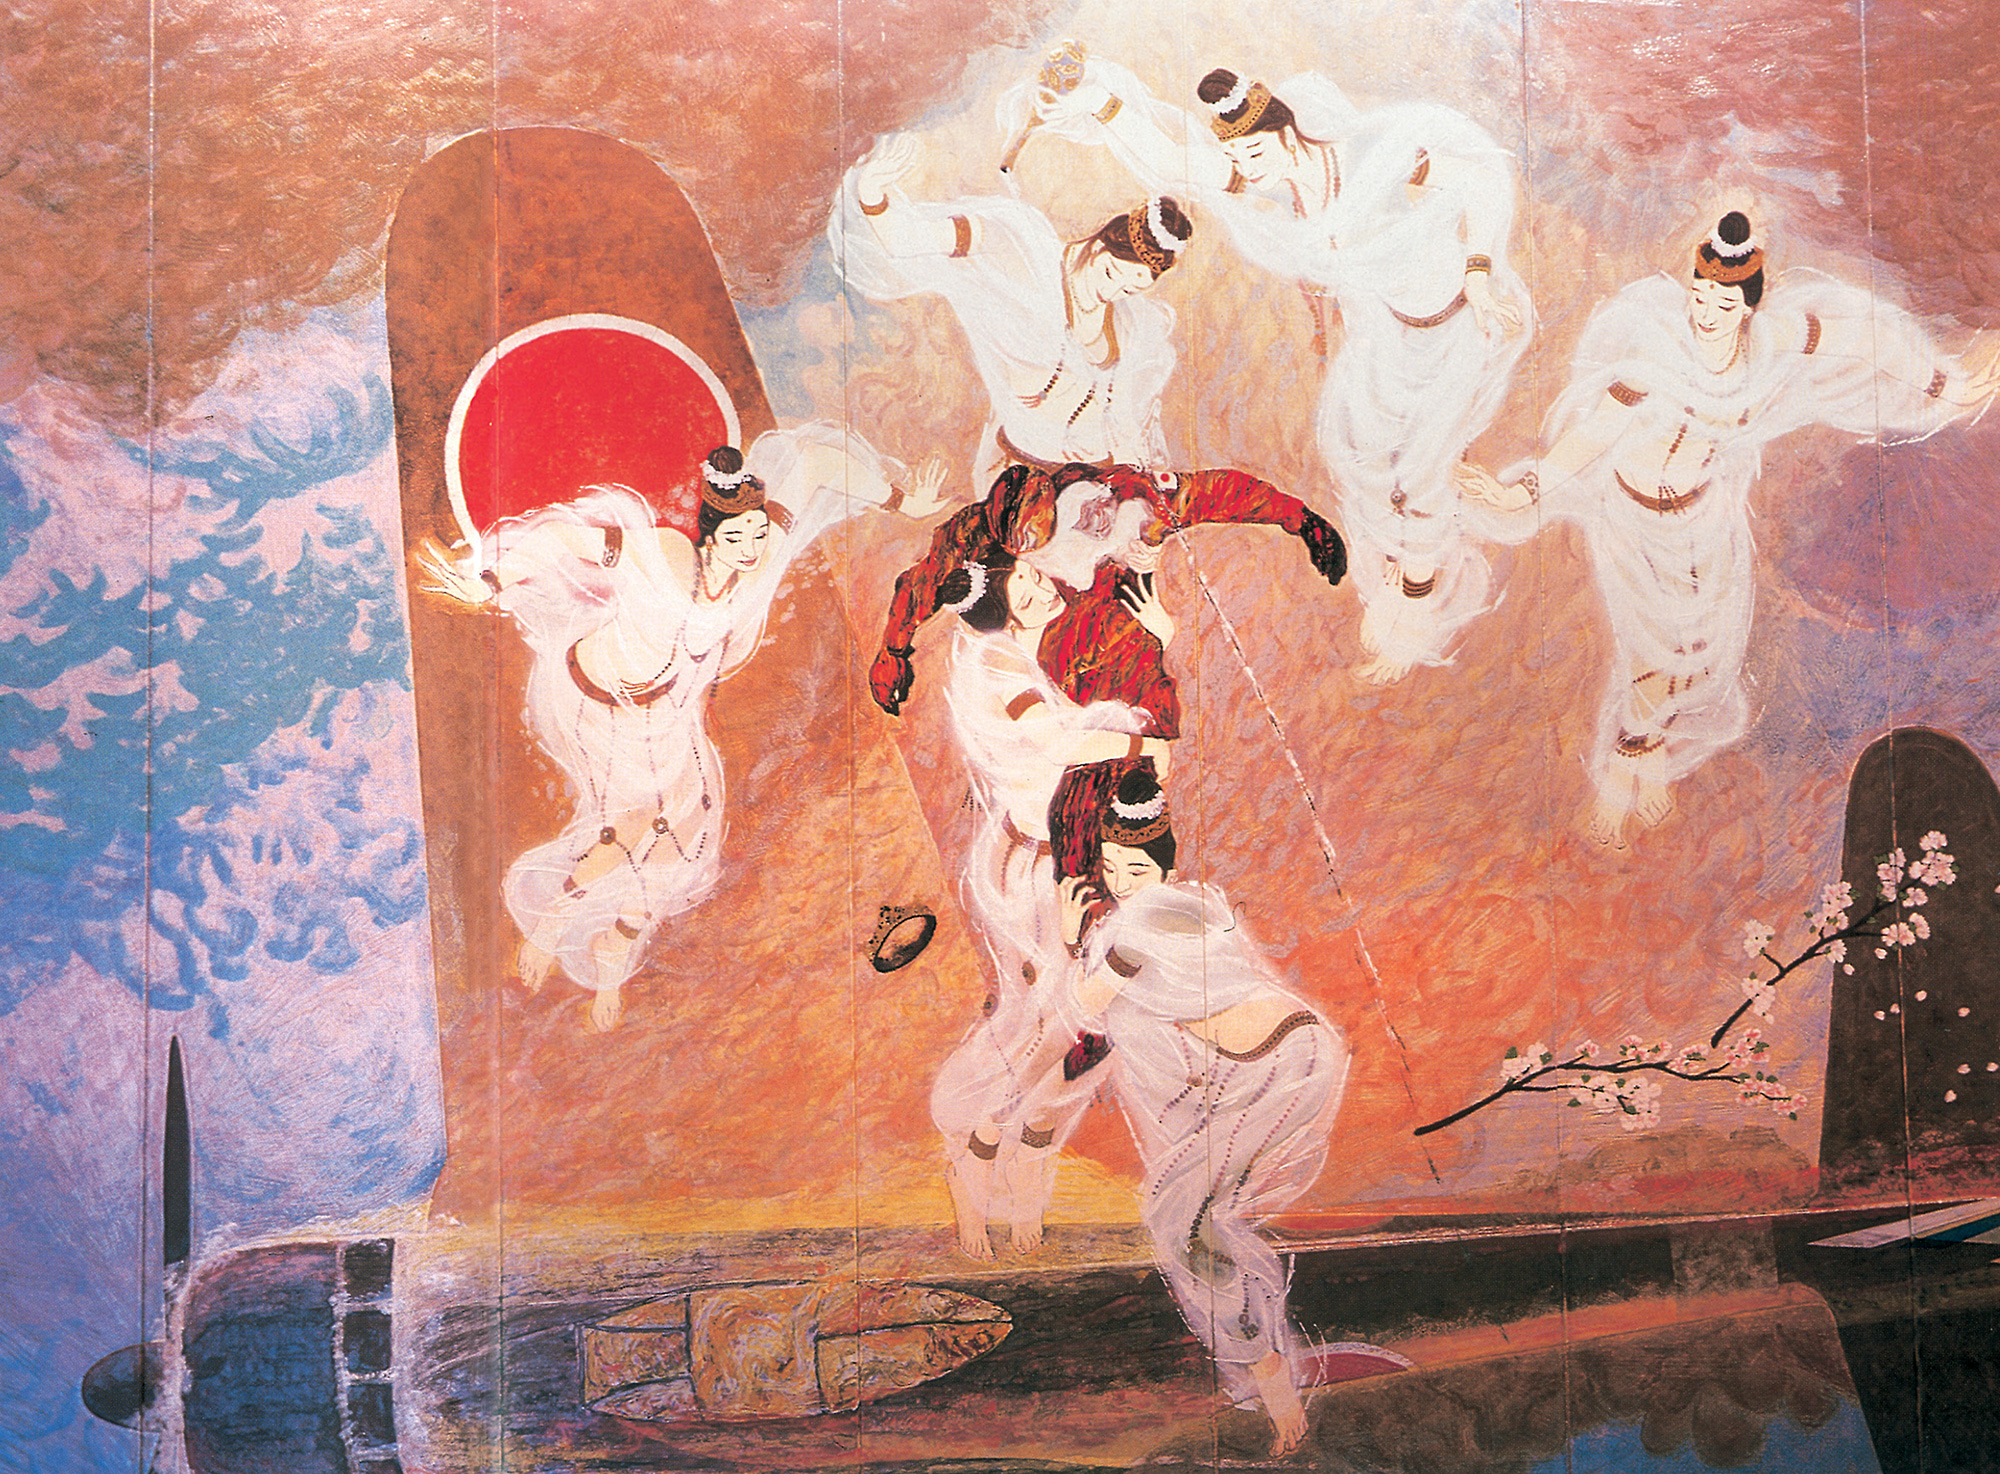 A mural by Katsuyoshi Nakaya titled “The Chiran Requiem”, depicting six heavenly maidens carrying away the soul of a Kamikaze pilot. 